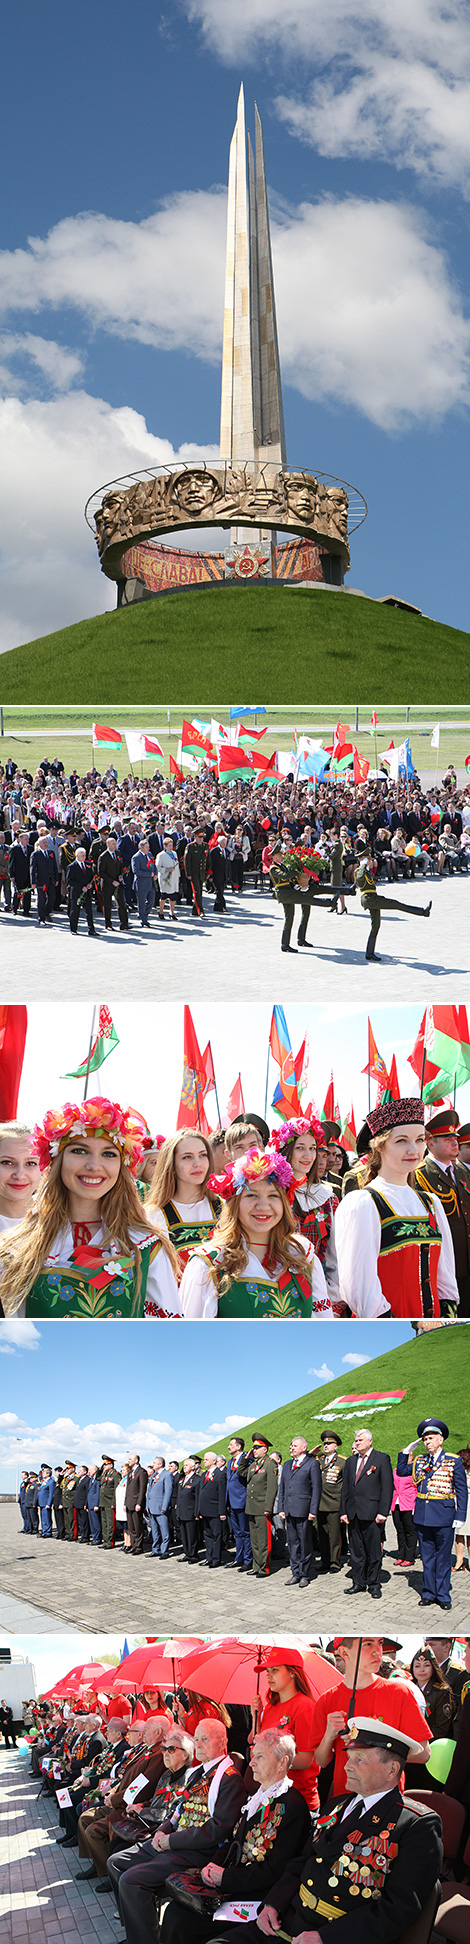 Victory Day: Remembrance festival near the Mound of Glory